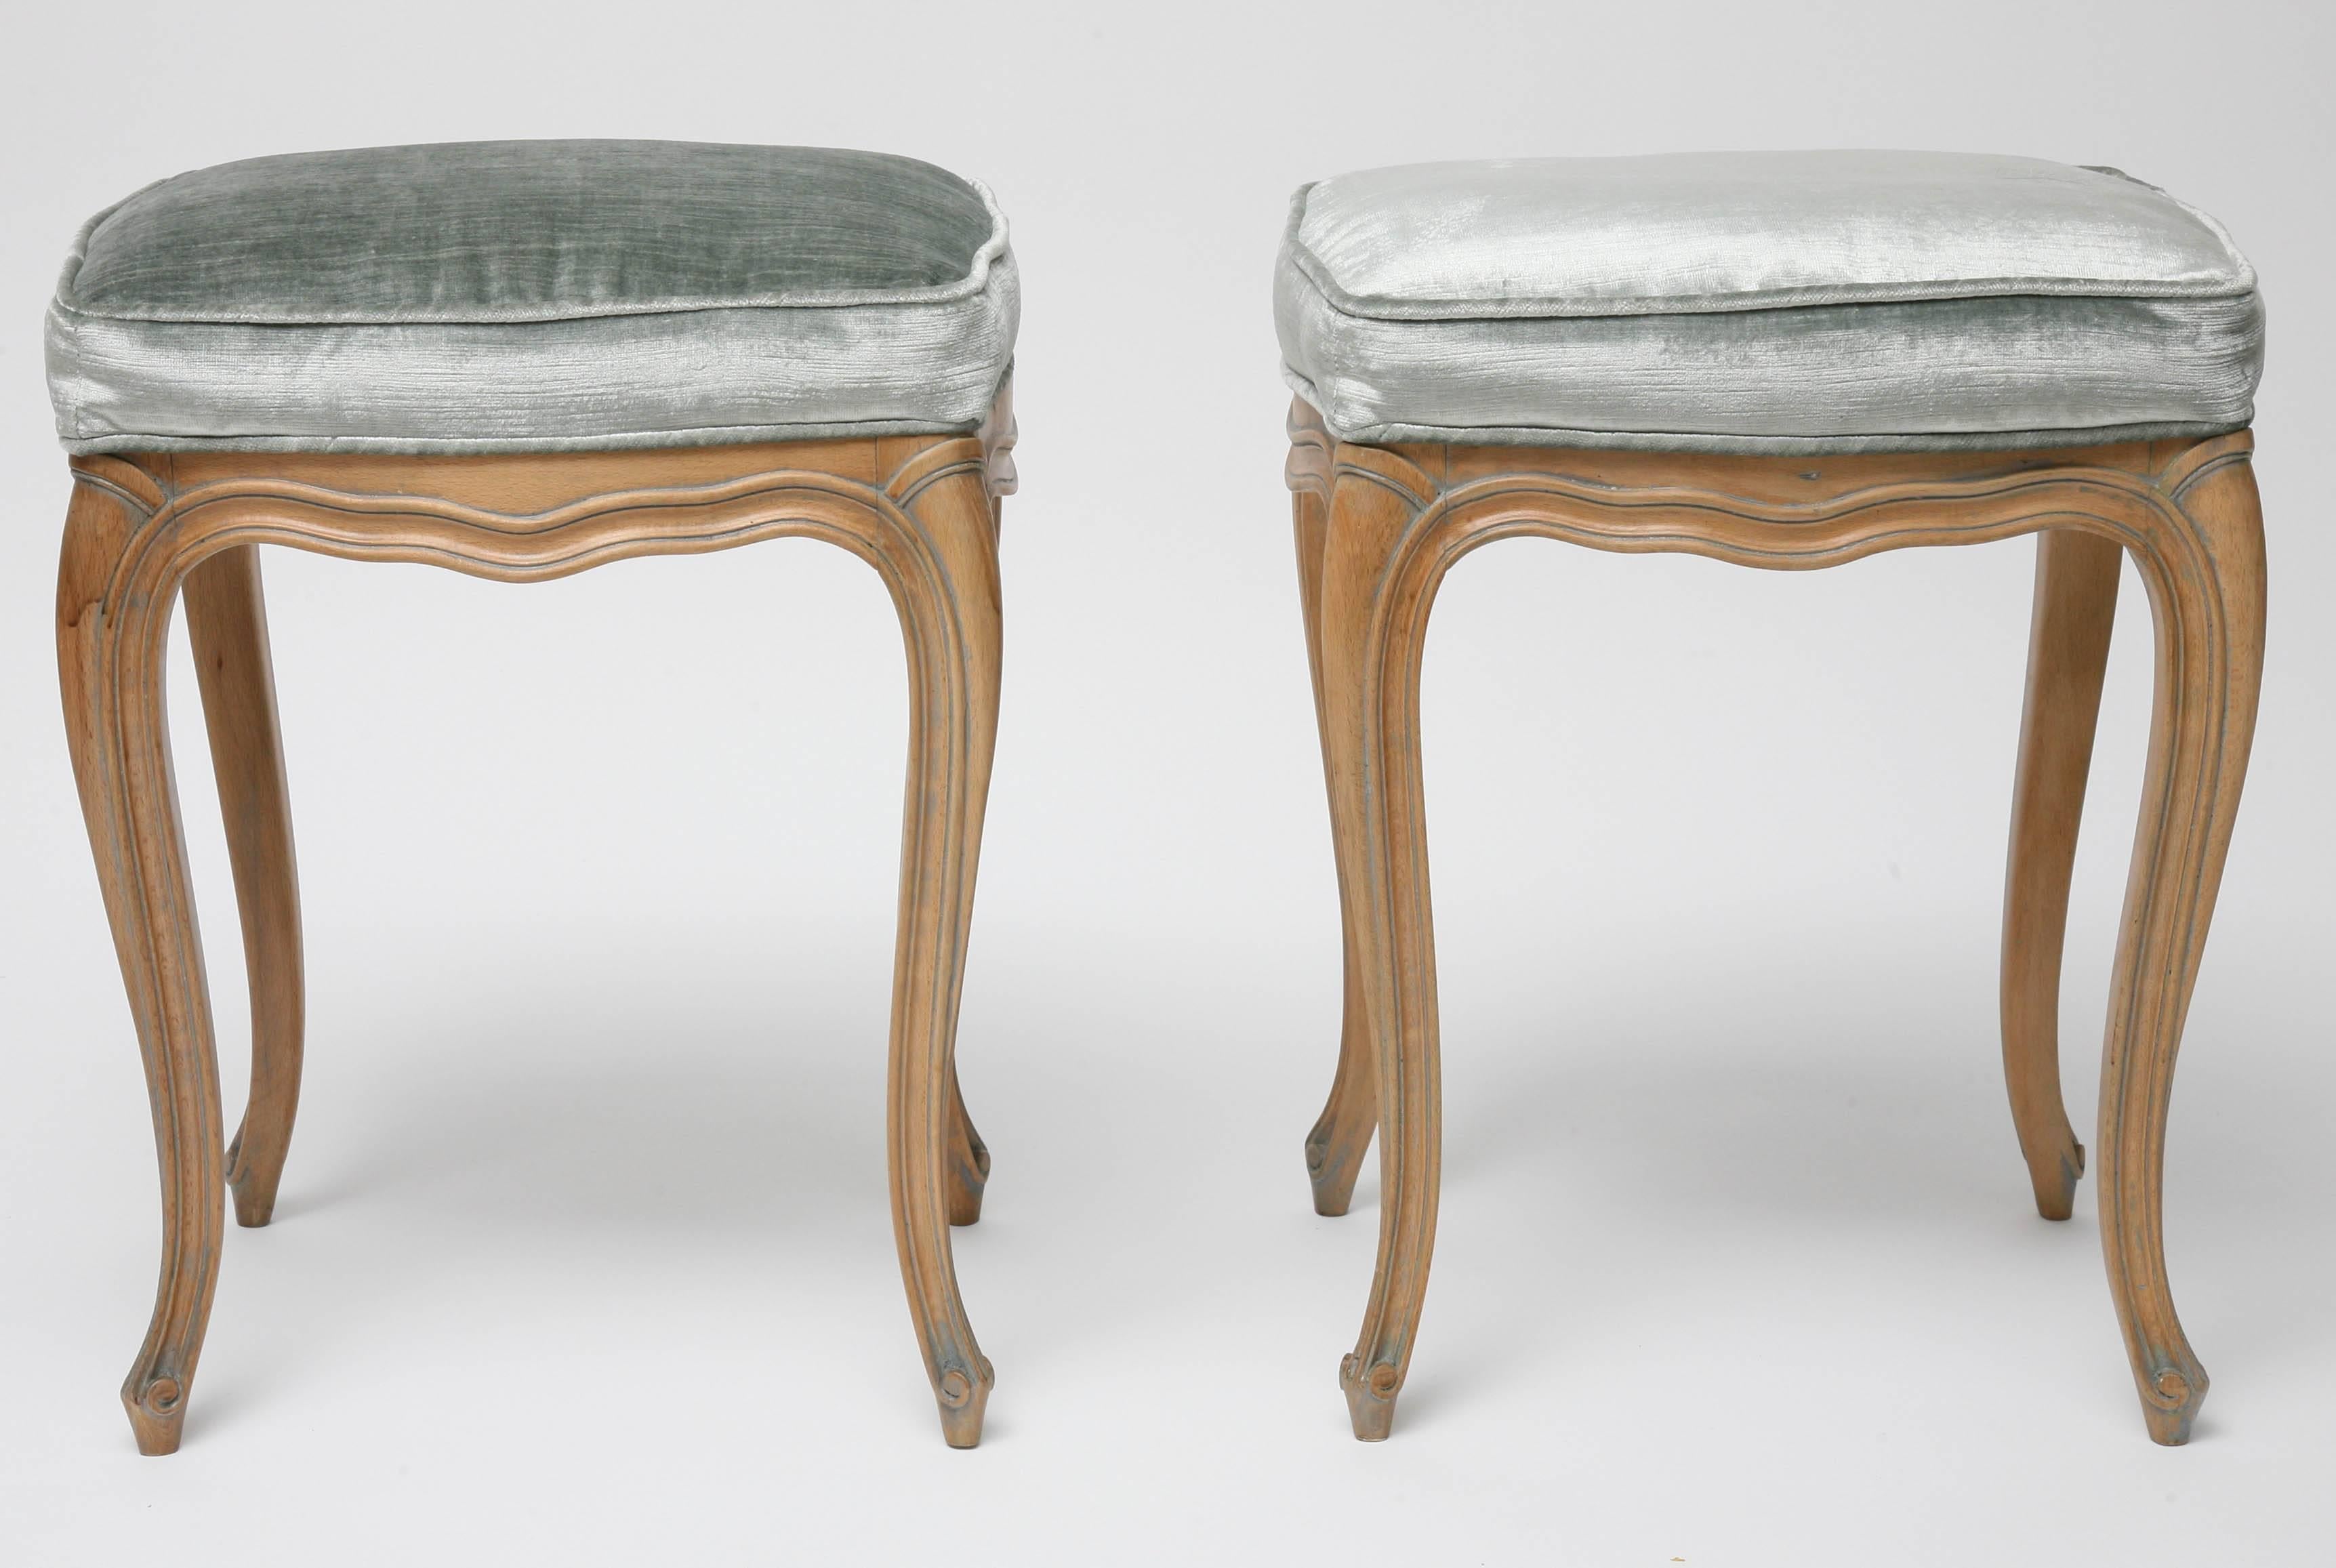 This pair of charming Louis XV style stools were recently acquired from a Palm Beach estate and  have a natural beechwood frame with a blue-over-glaze that highlights the curves of the pieces. The cabriolet legs make these pieces light in appearance